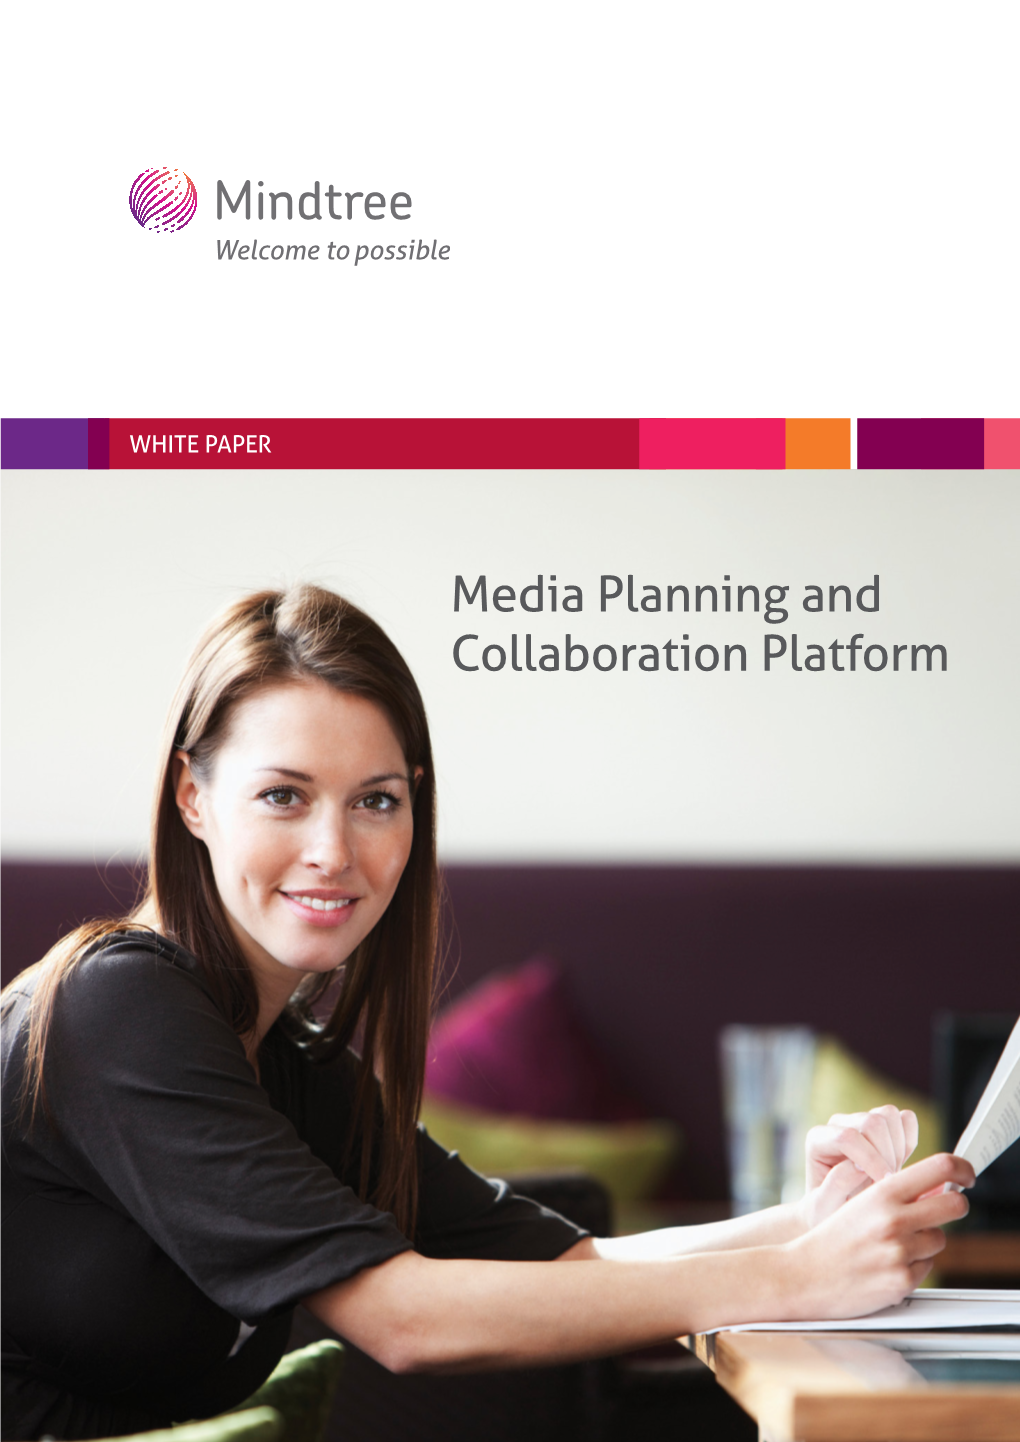 WHITE PAPER. Media Planning and Collaboration Platform